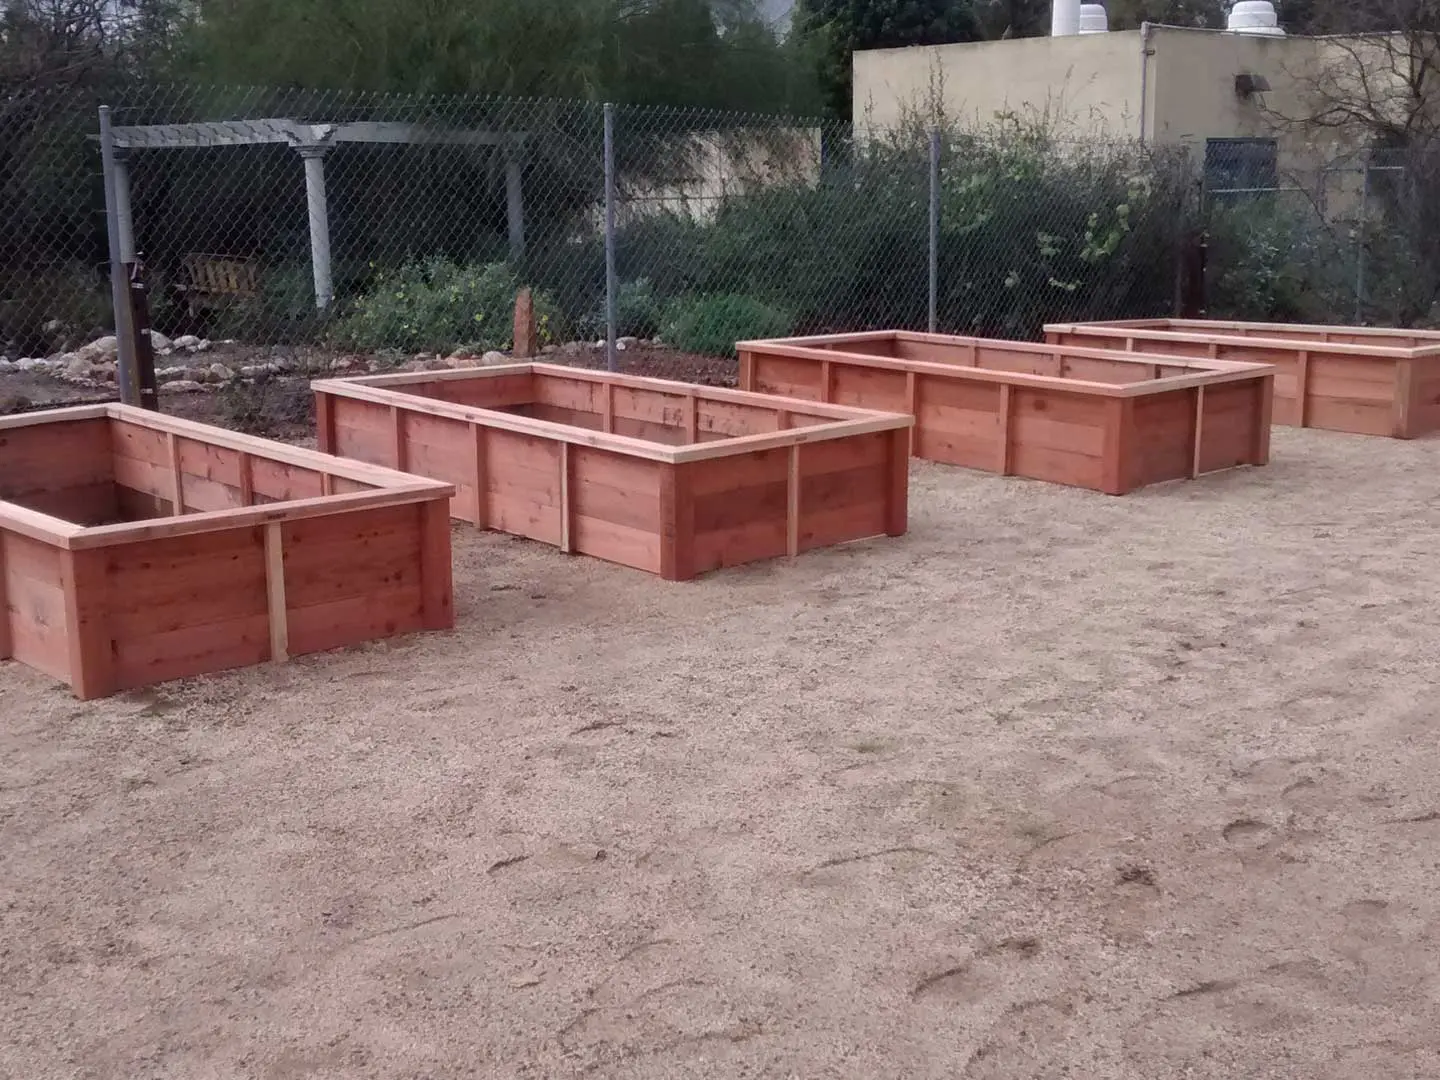 A group of raised garden beds in a dirt yard.